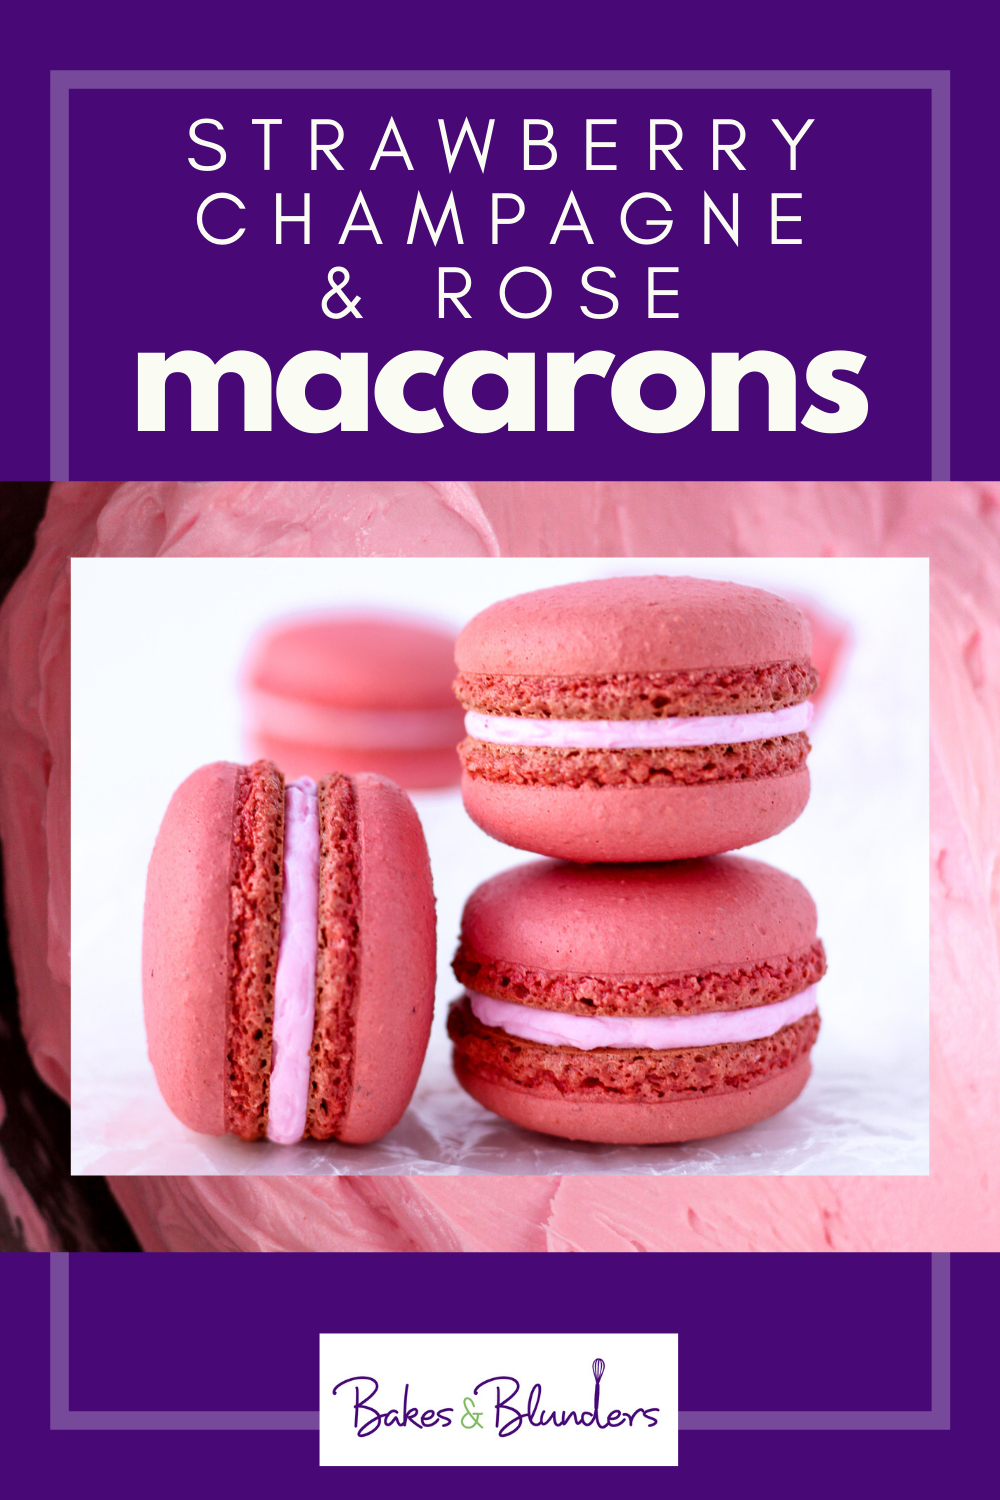 Strawberry, Champagne, and Rose Macarons - Bakes and Blunders